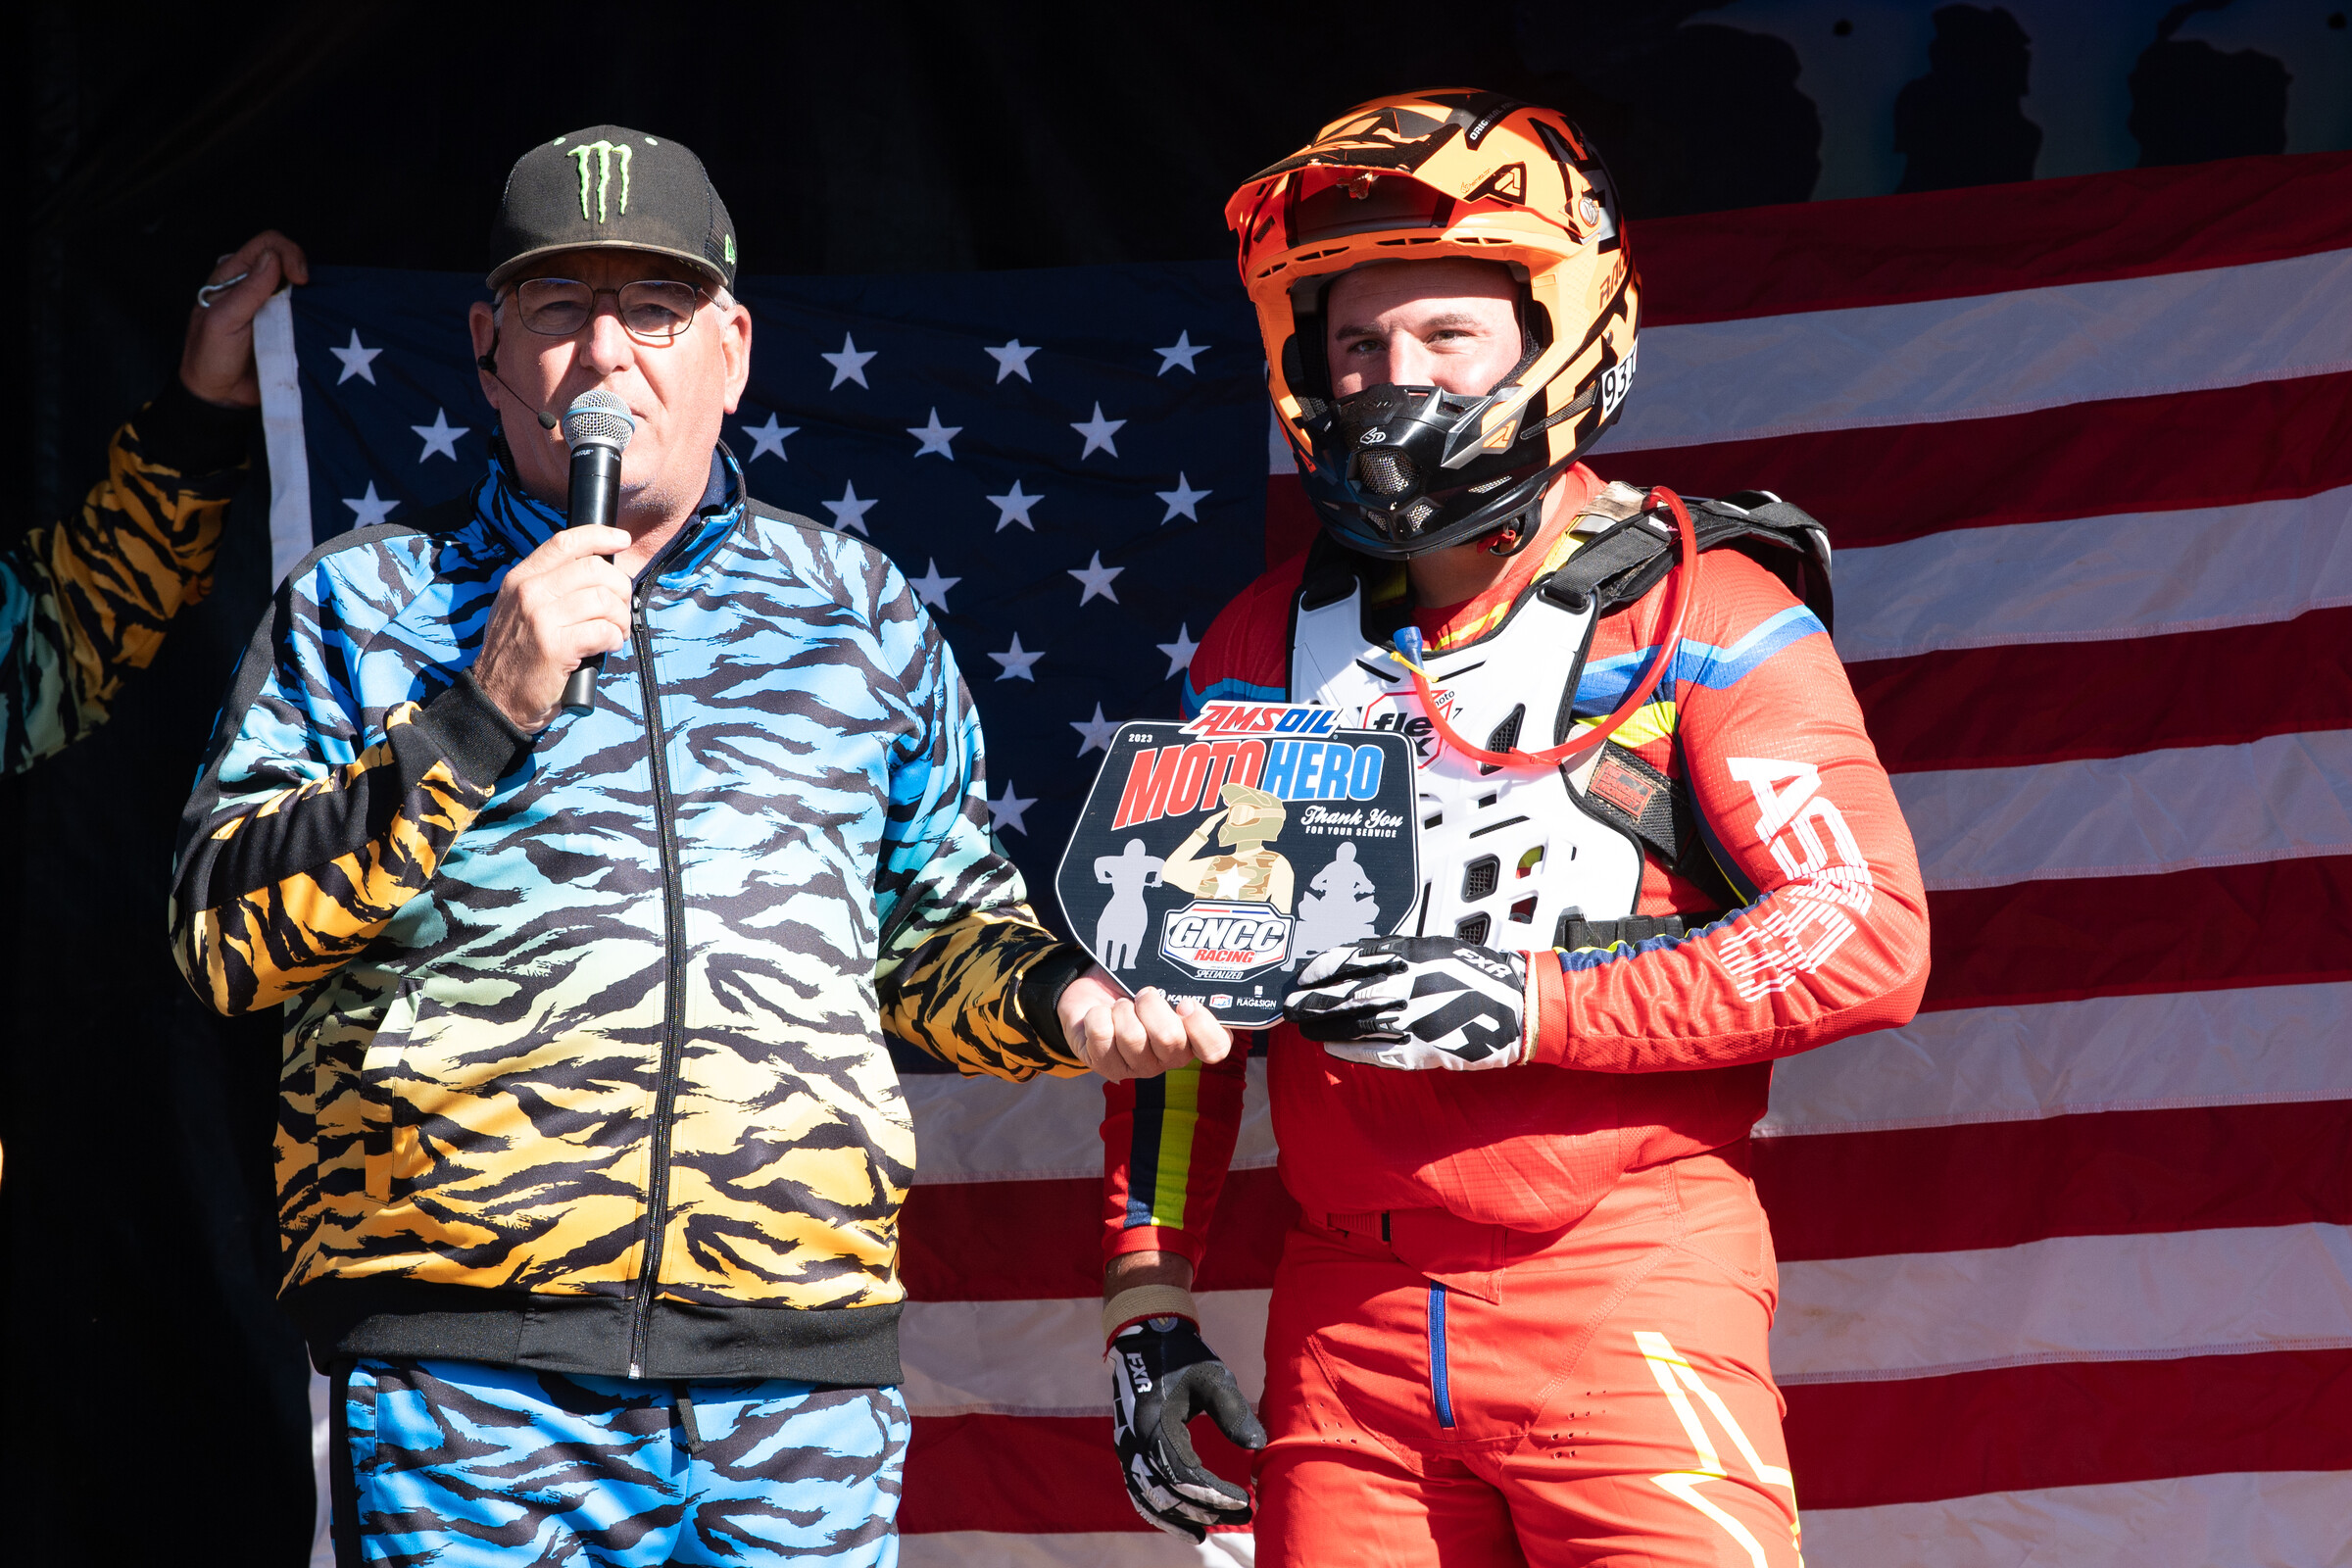 Broc French was awarded the AMSOIL Moto Hero honors at Tiger Run.